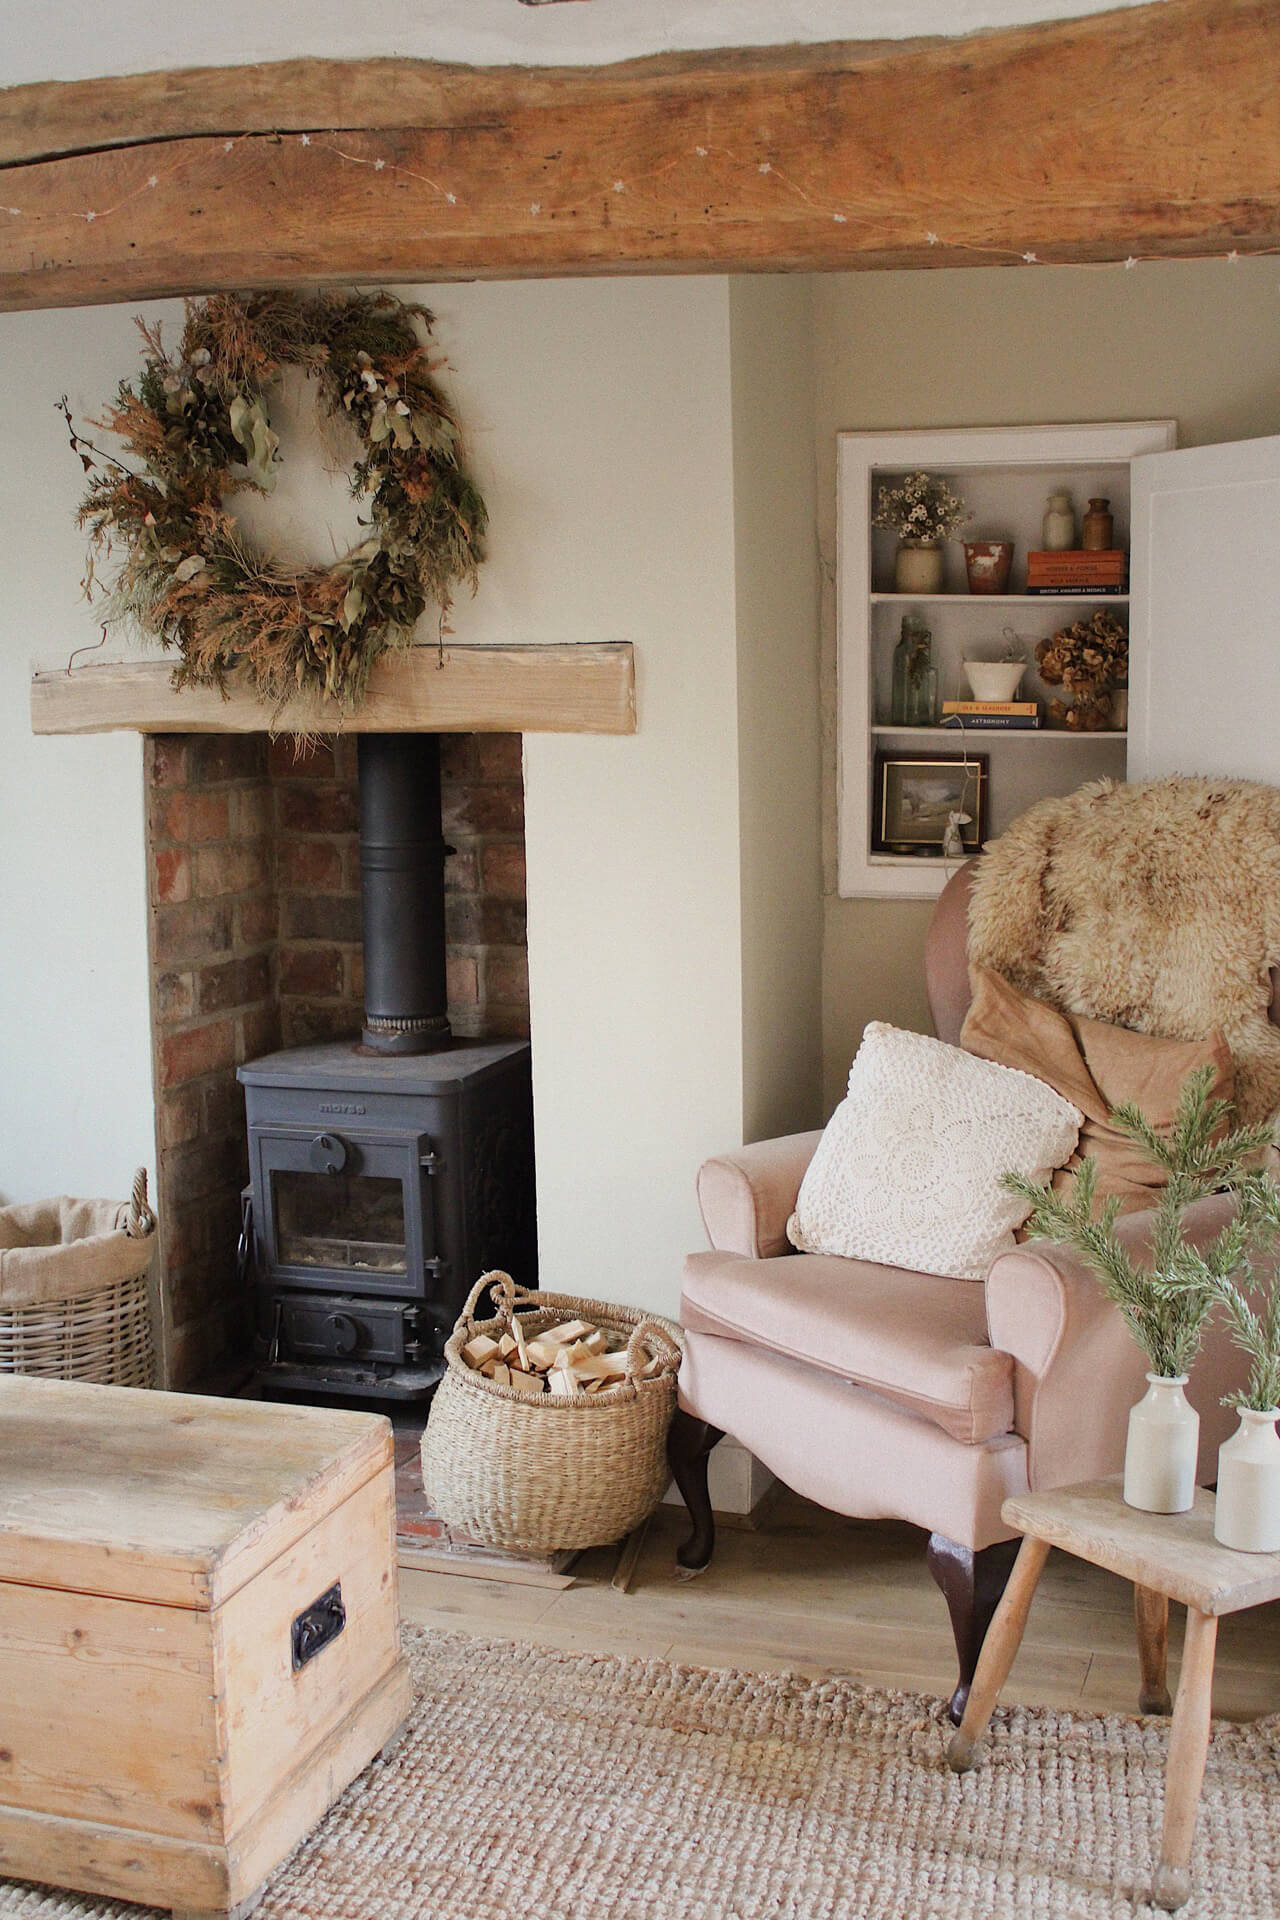 Home tour with Rachel Ashfield of @the_old_cottage - a cosy corner in the old cottage living room with a wood burner, a large dried wreath and a pink armchair